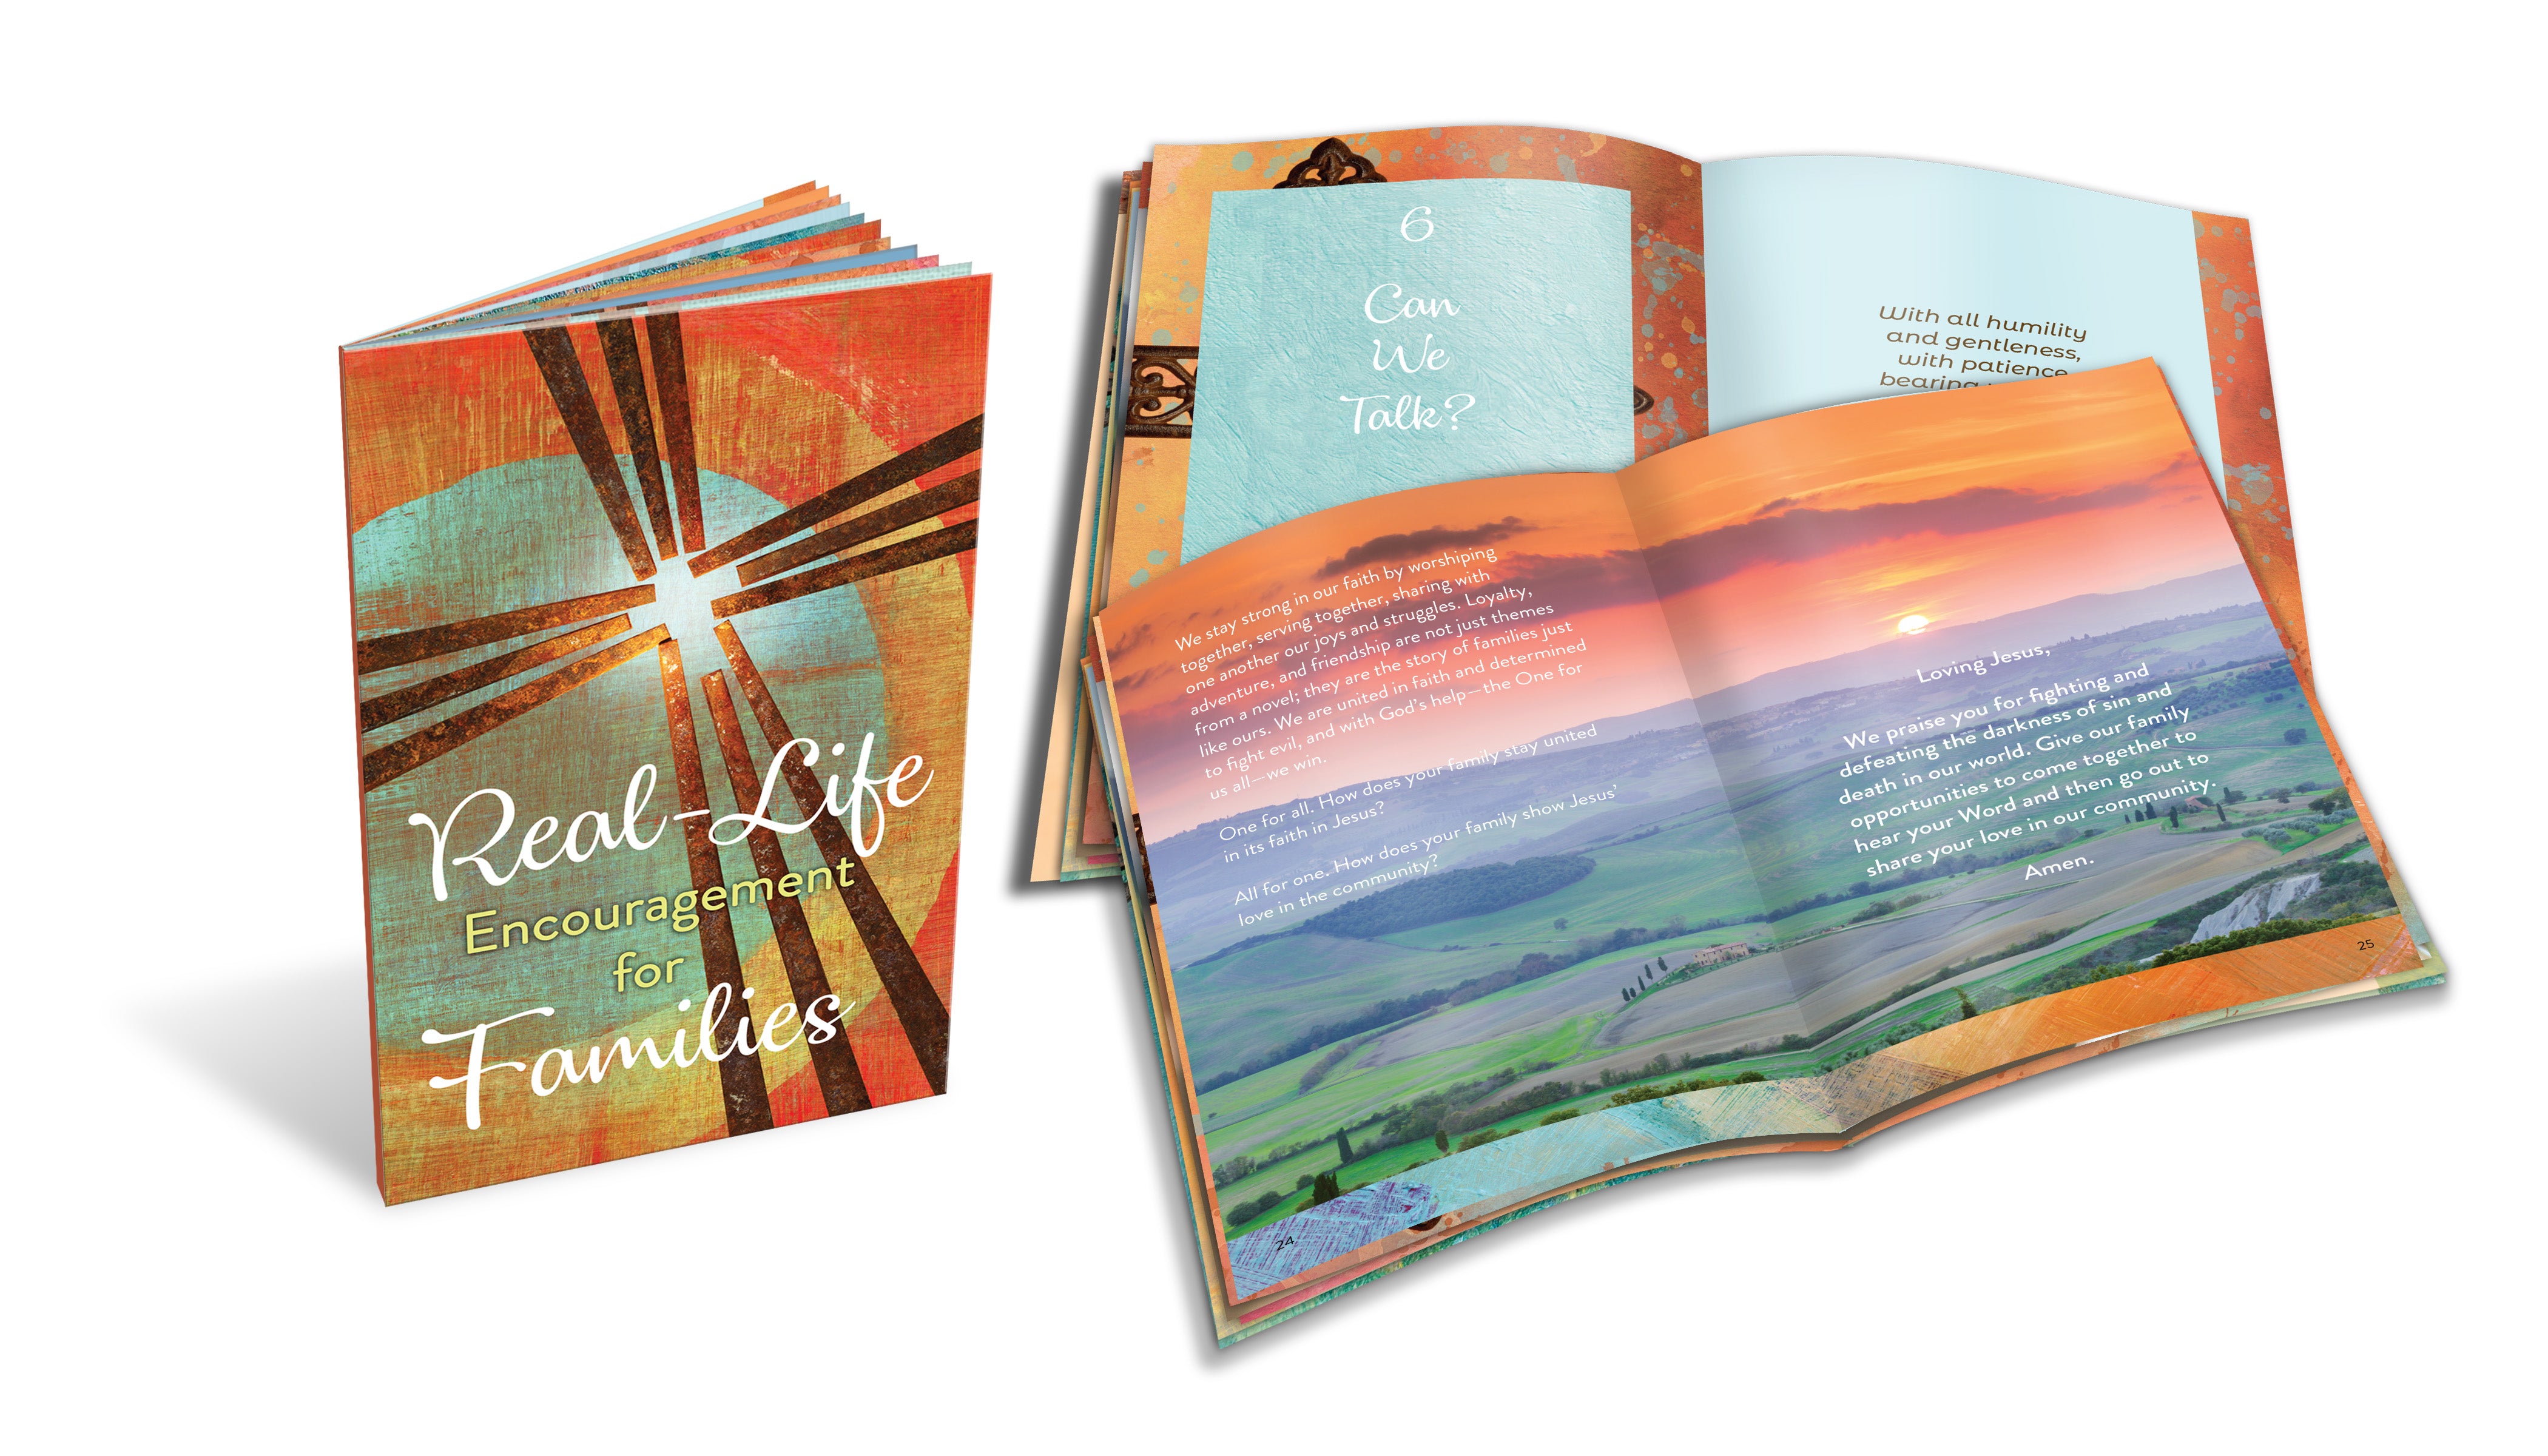 Real-Life Encouragement for Families Soft Cover Book